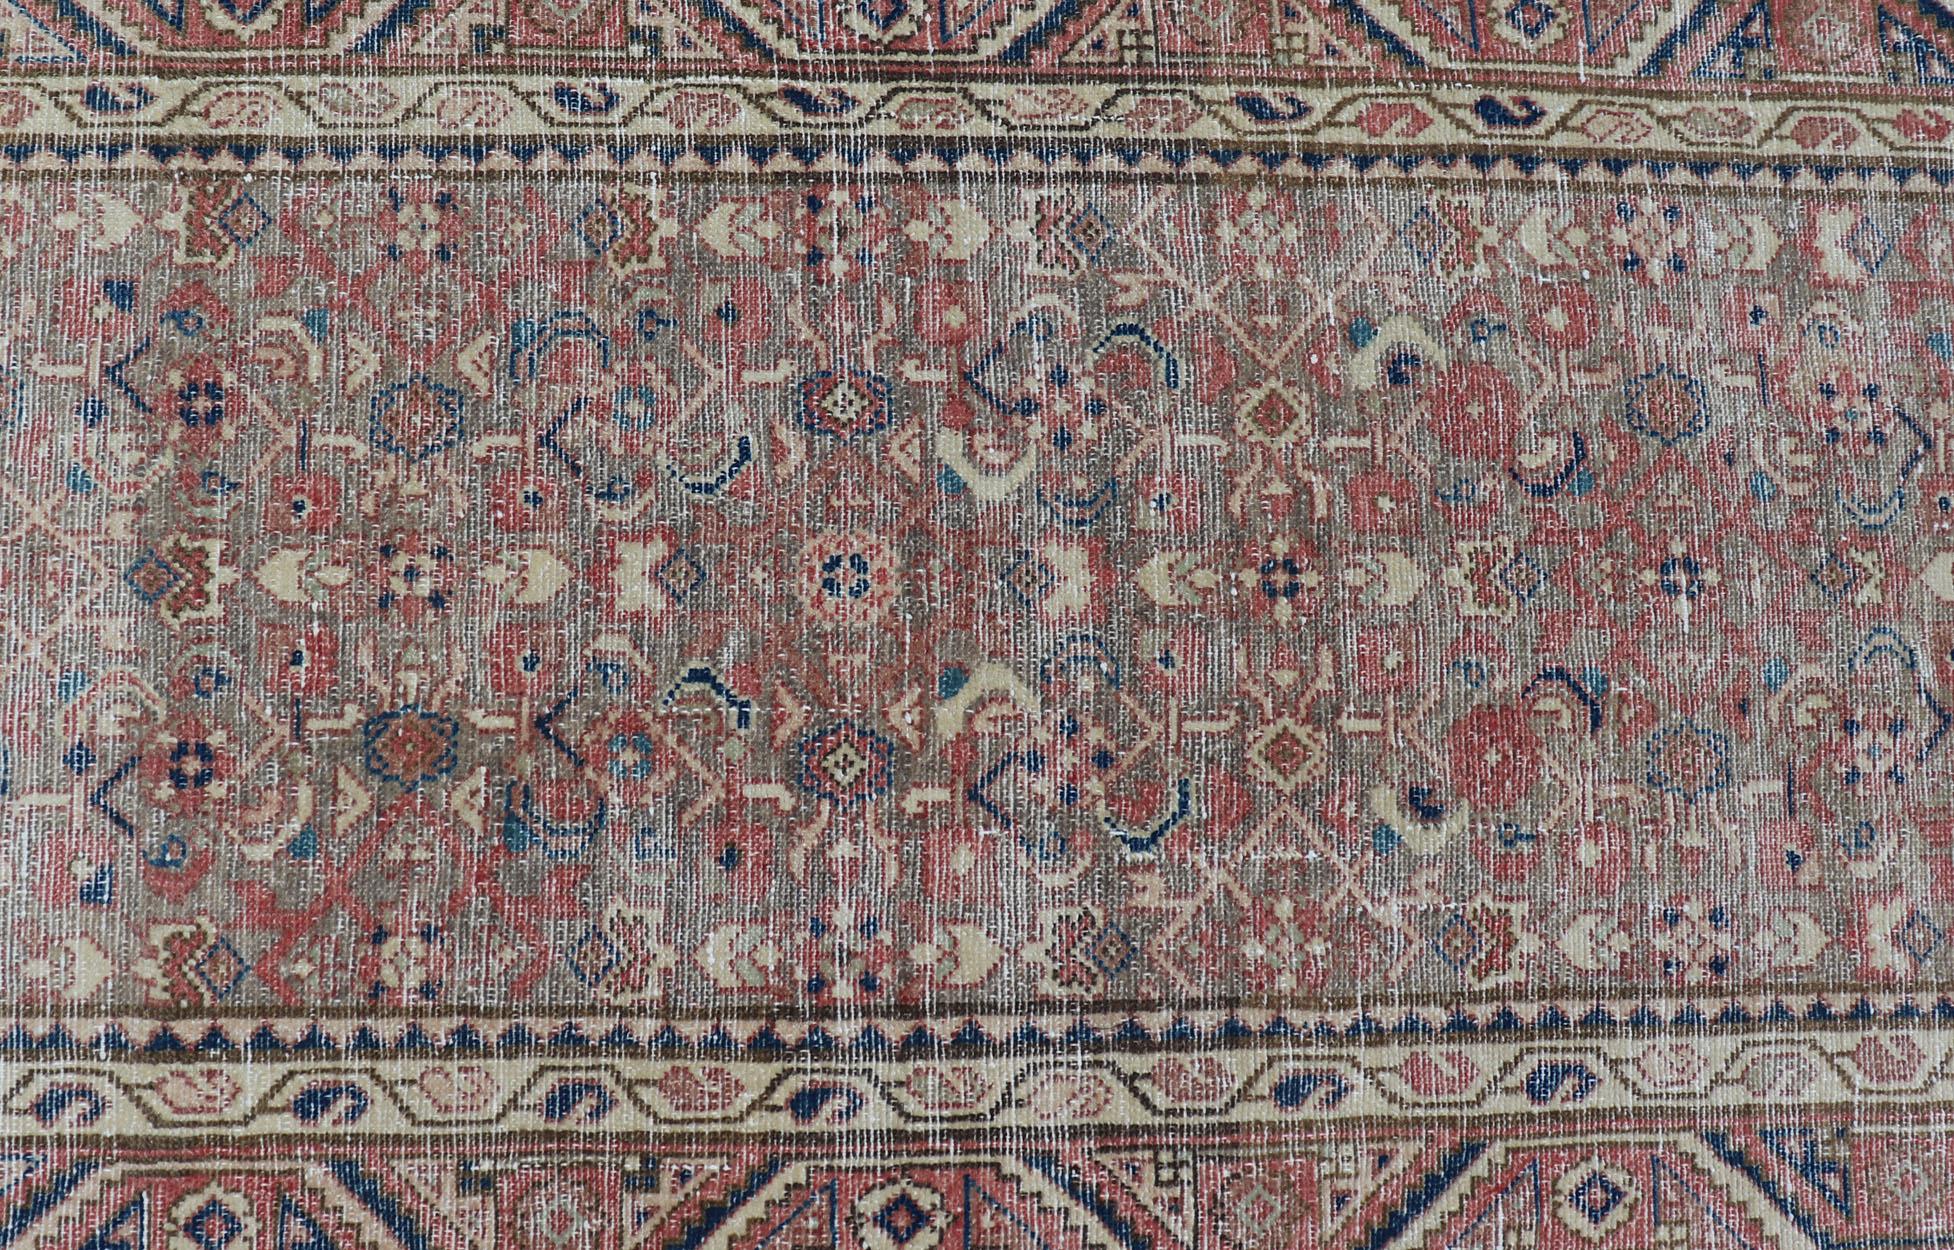 Antique Persian Malayer Runner in Tones of Blue, Salmon, Cream, and Tans For Sale 3